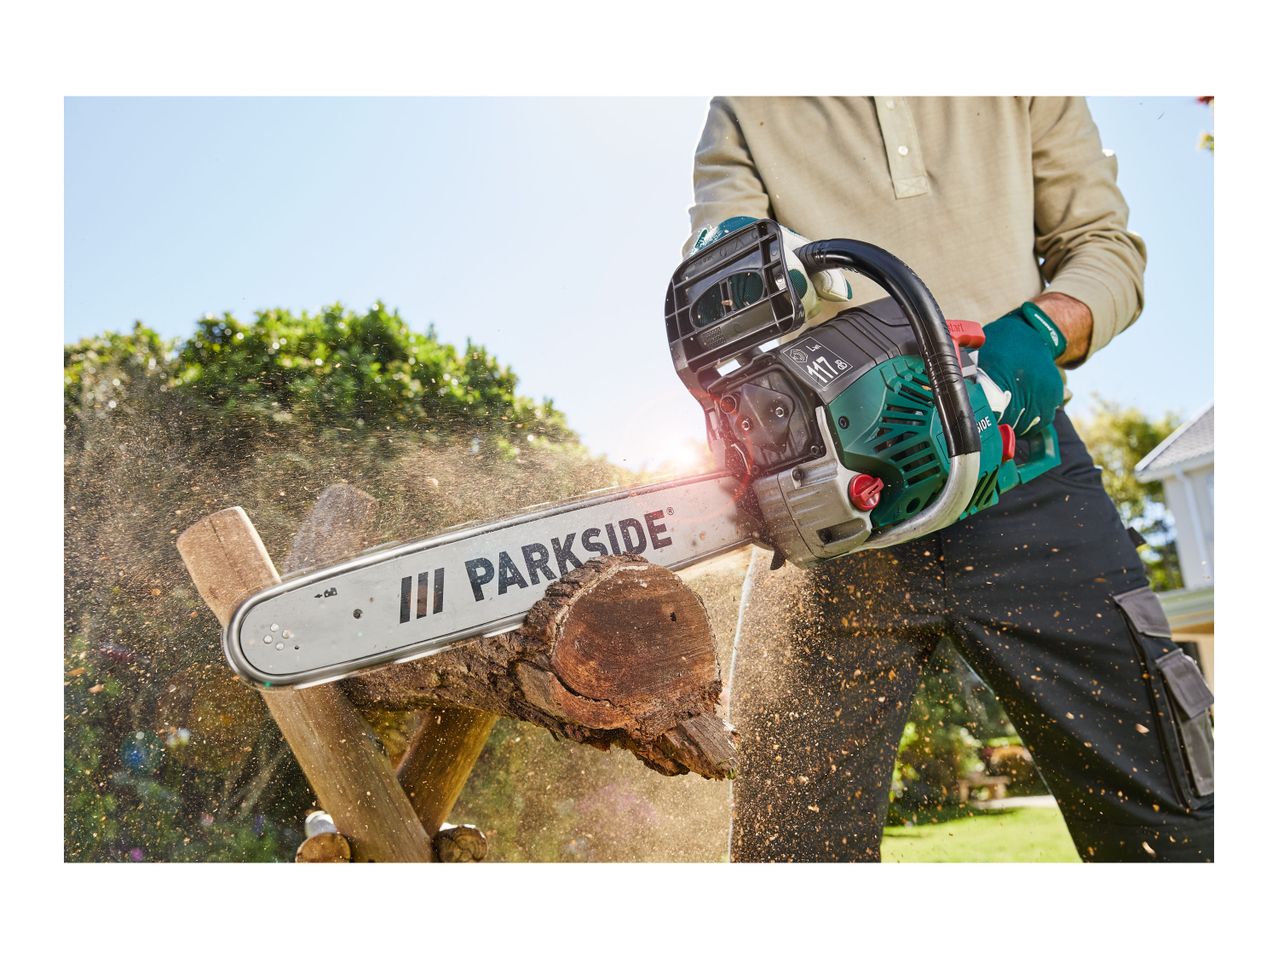 Go to full screen view: Parkside Petrol Chainsaw - Image 5